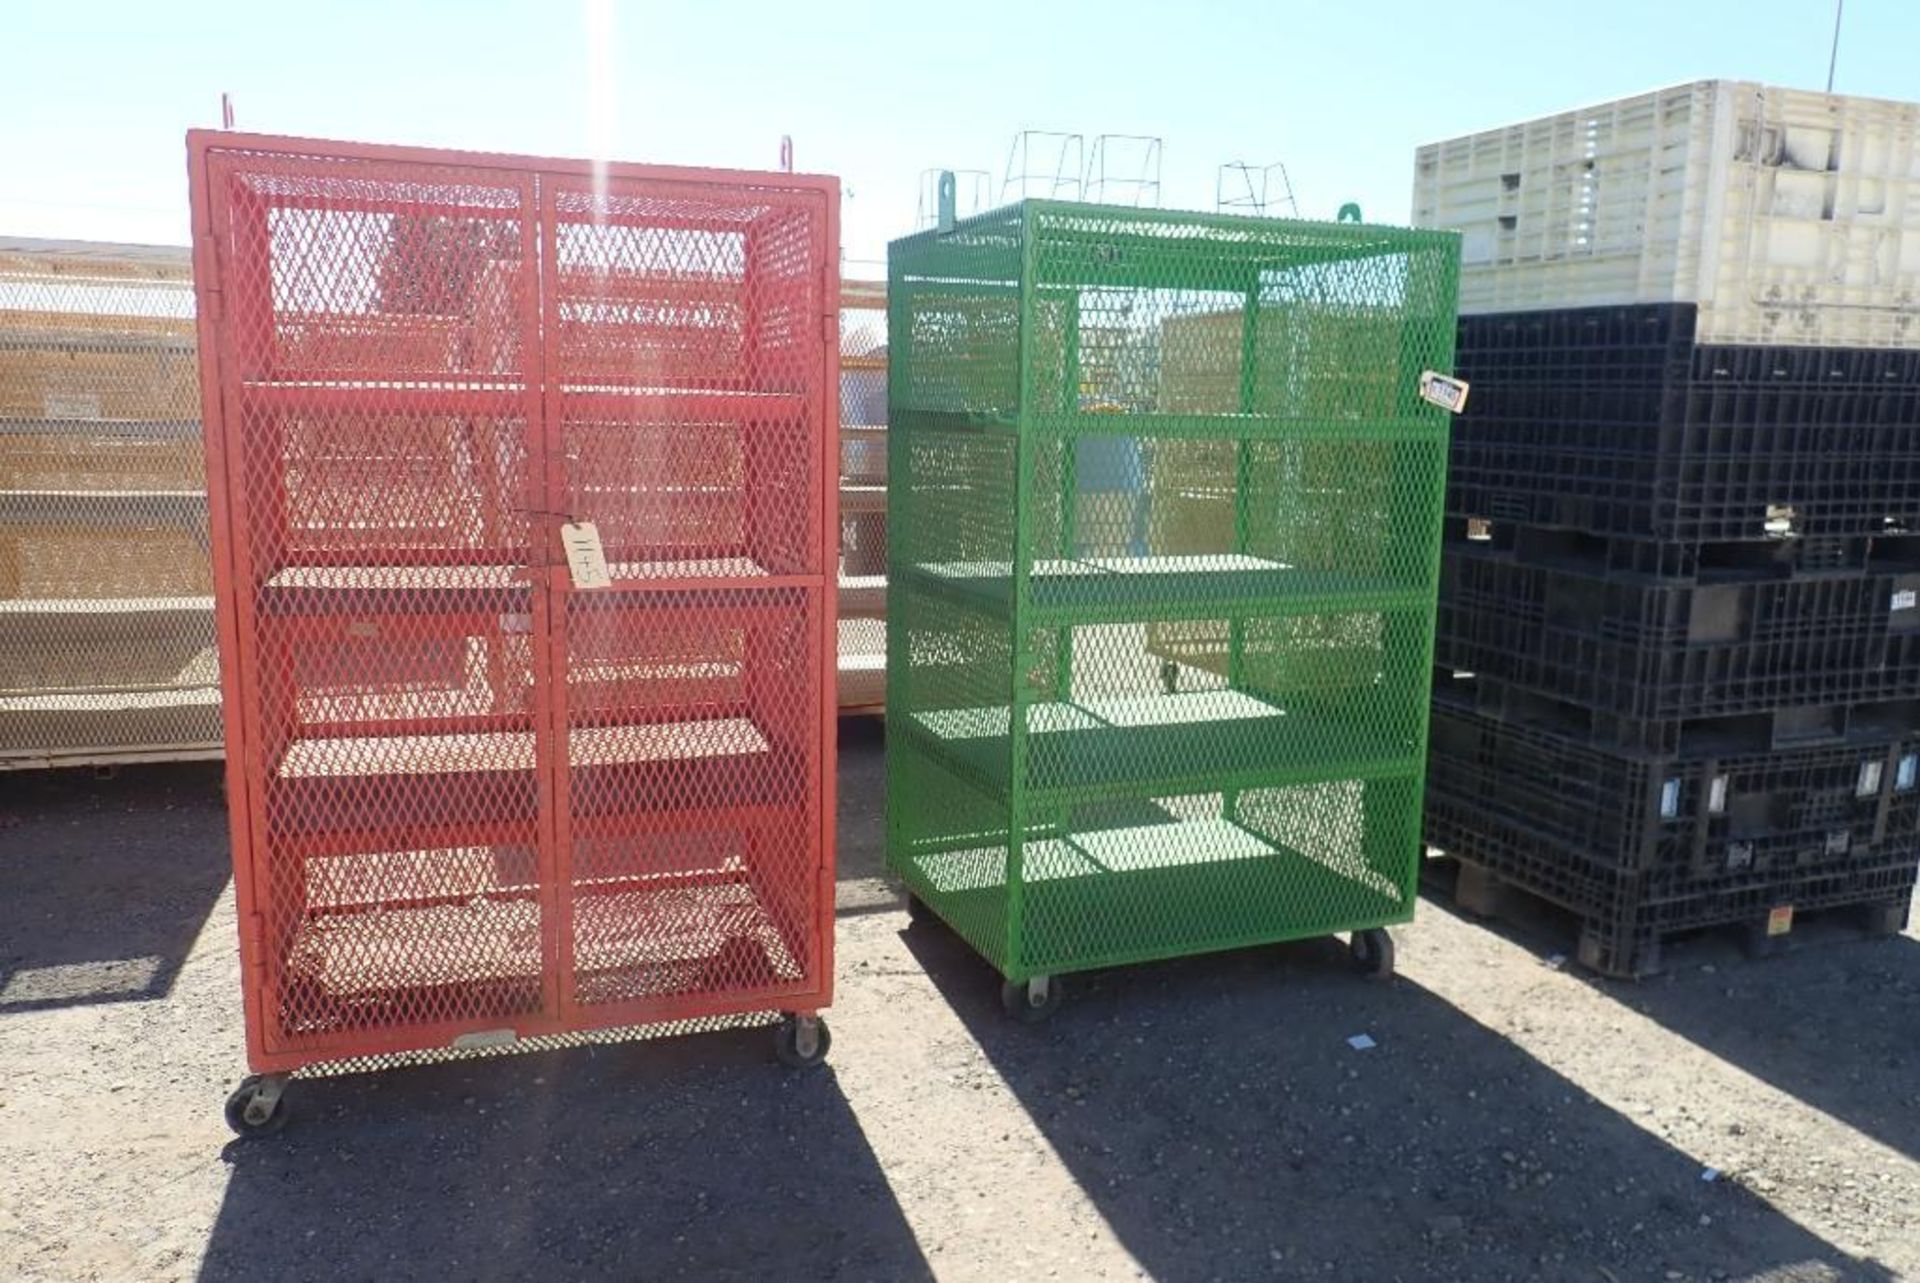 Lot of (2) Mobile Lockout Cabinets w/Lifting Lugs.